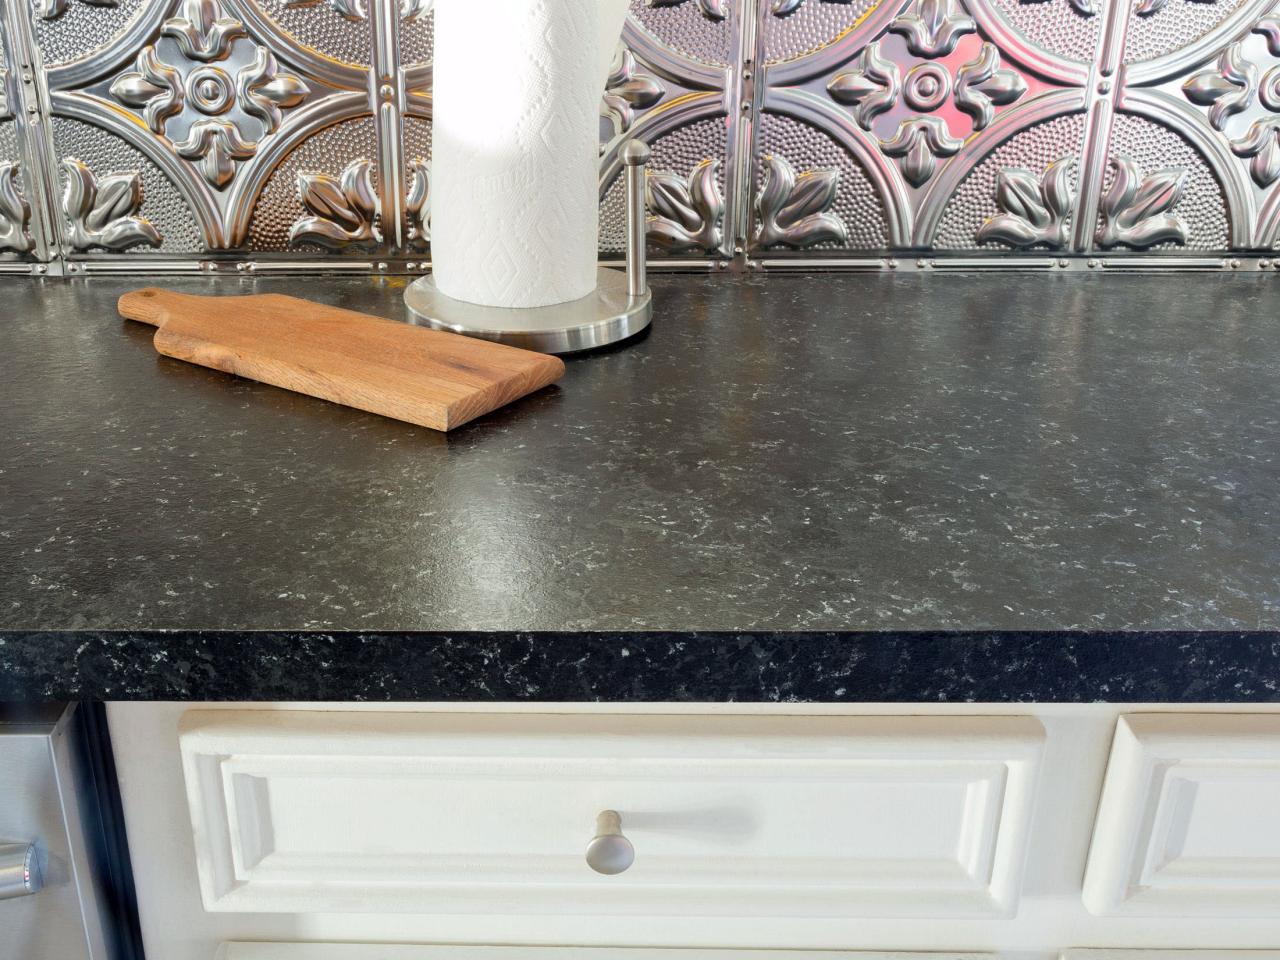 How To Paint A Laminate Countertop, Pros And Cons Of Painting Granite Countertops